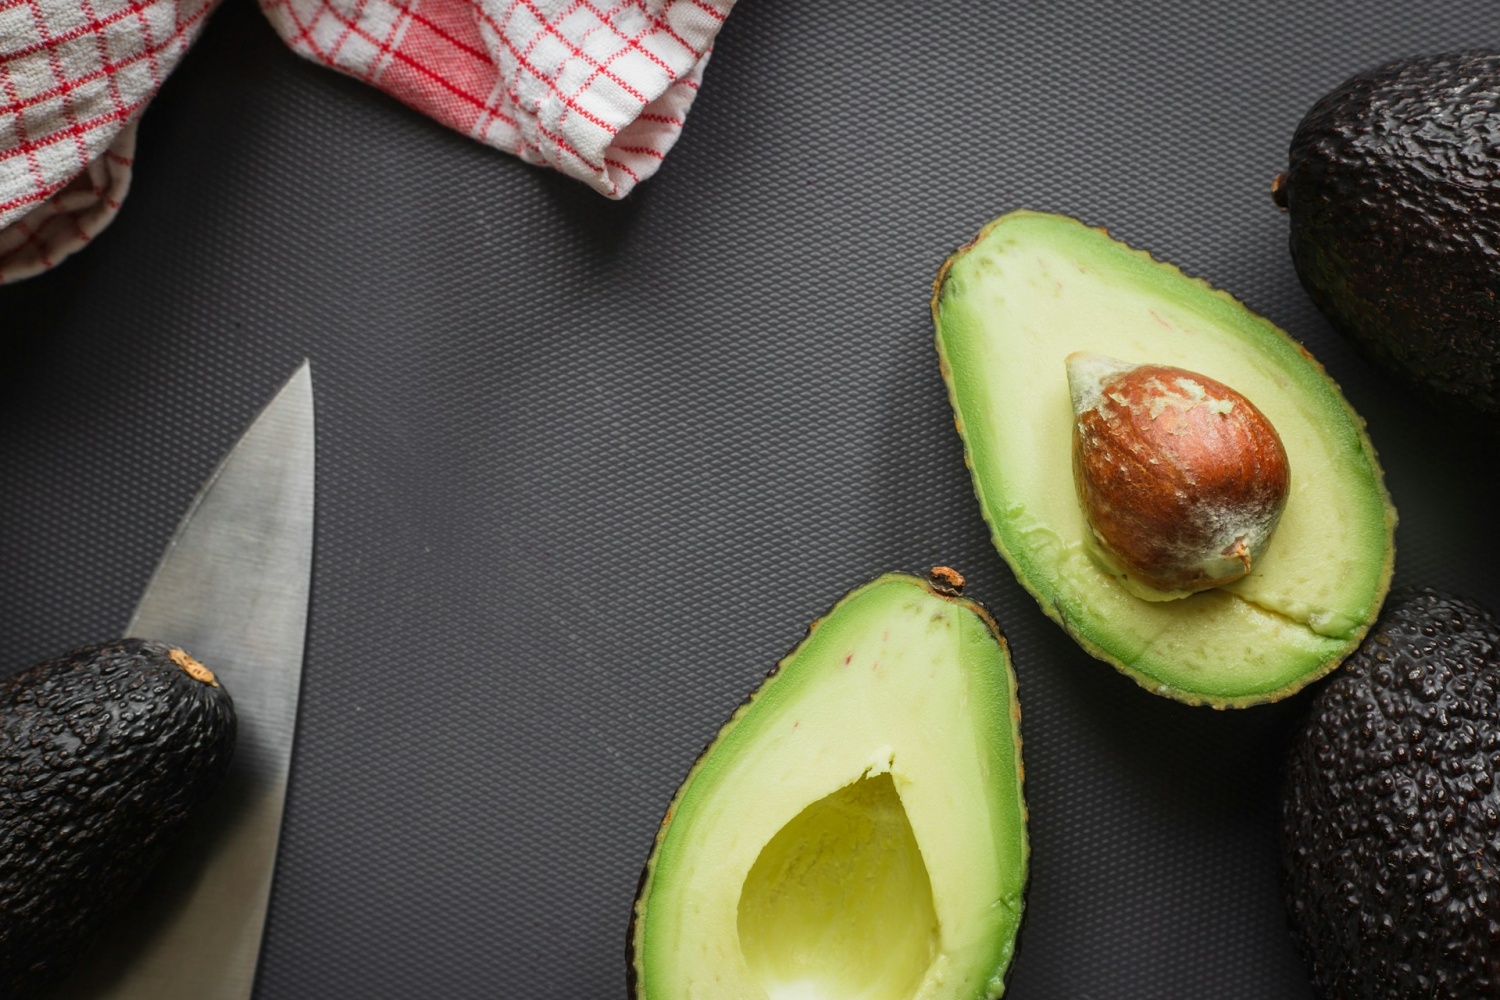 Benefits of Eating Avocados on Brain and Body